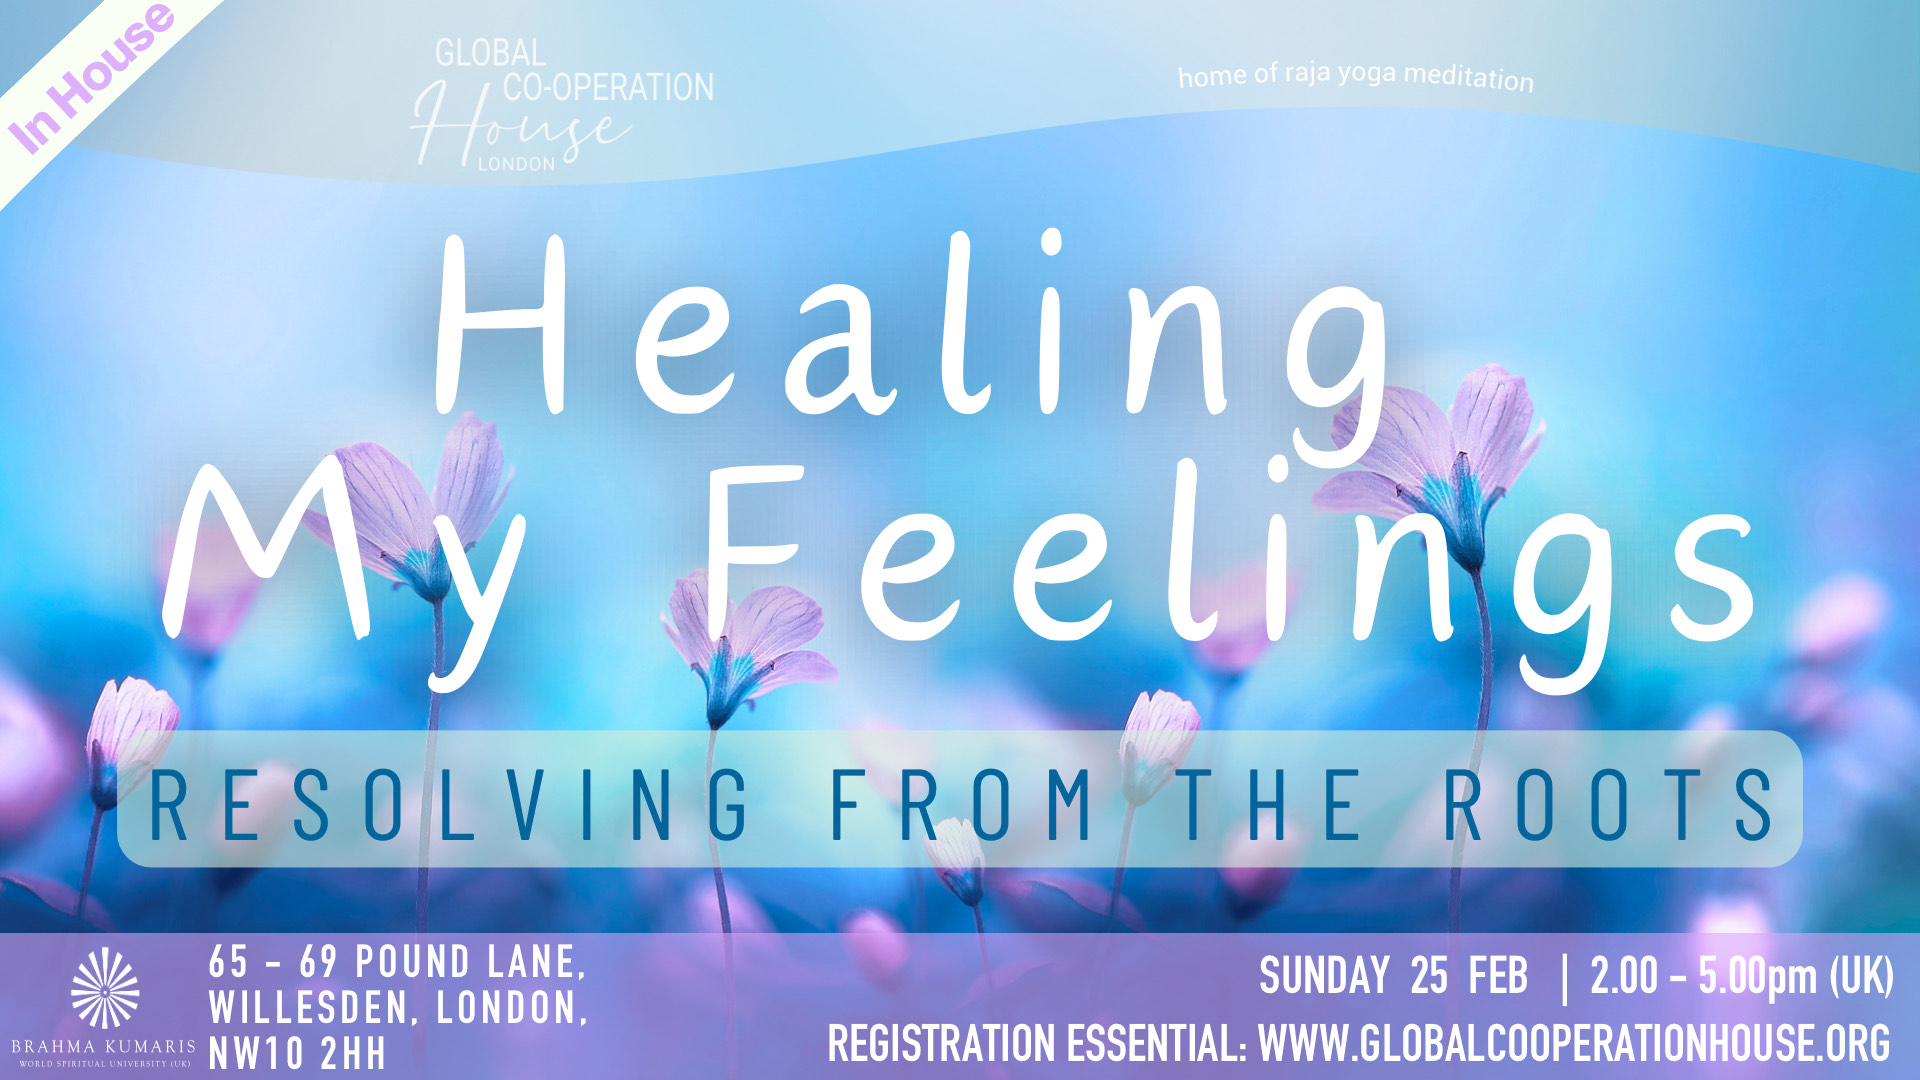 Healing My Feelings - Resolving from the roots